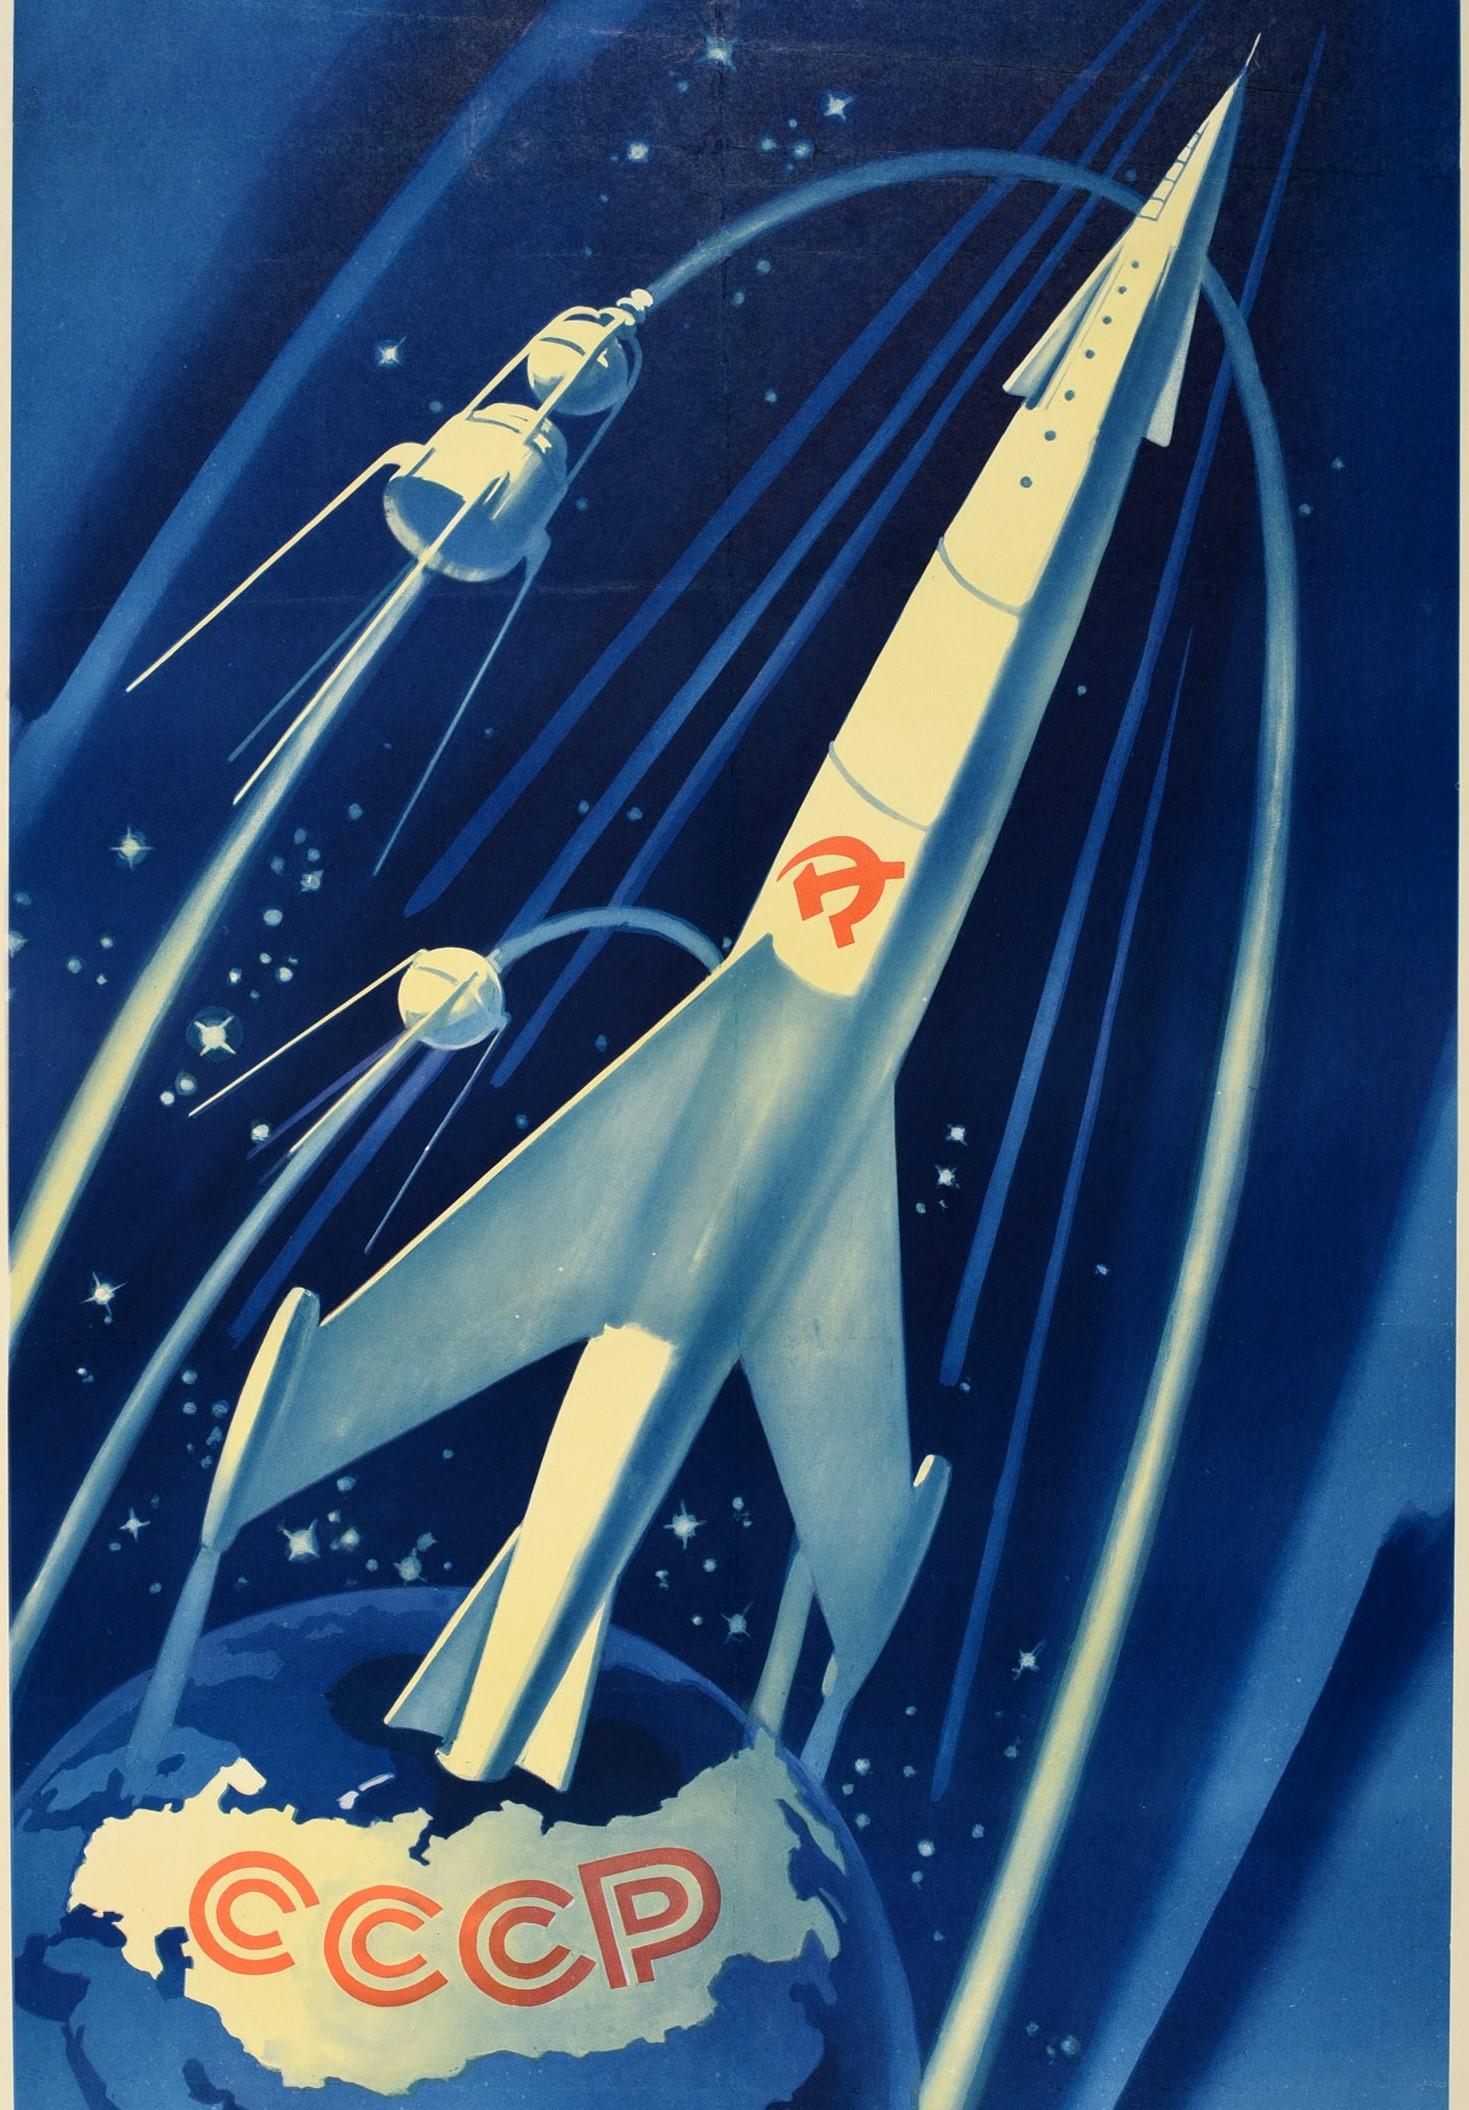 Original vintage Soviet Space Race era propaganda poster - Envoys of the native Soviet land We, as if in a daring dream, will pave the way to distant worlds and discover the secrets of the Universe - featuring a great design showing a Soviet rocket